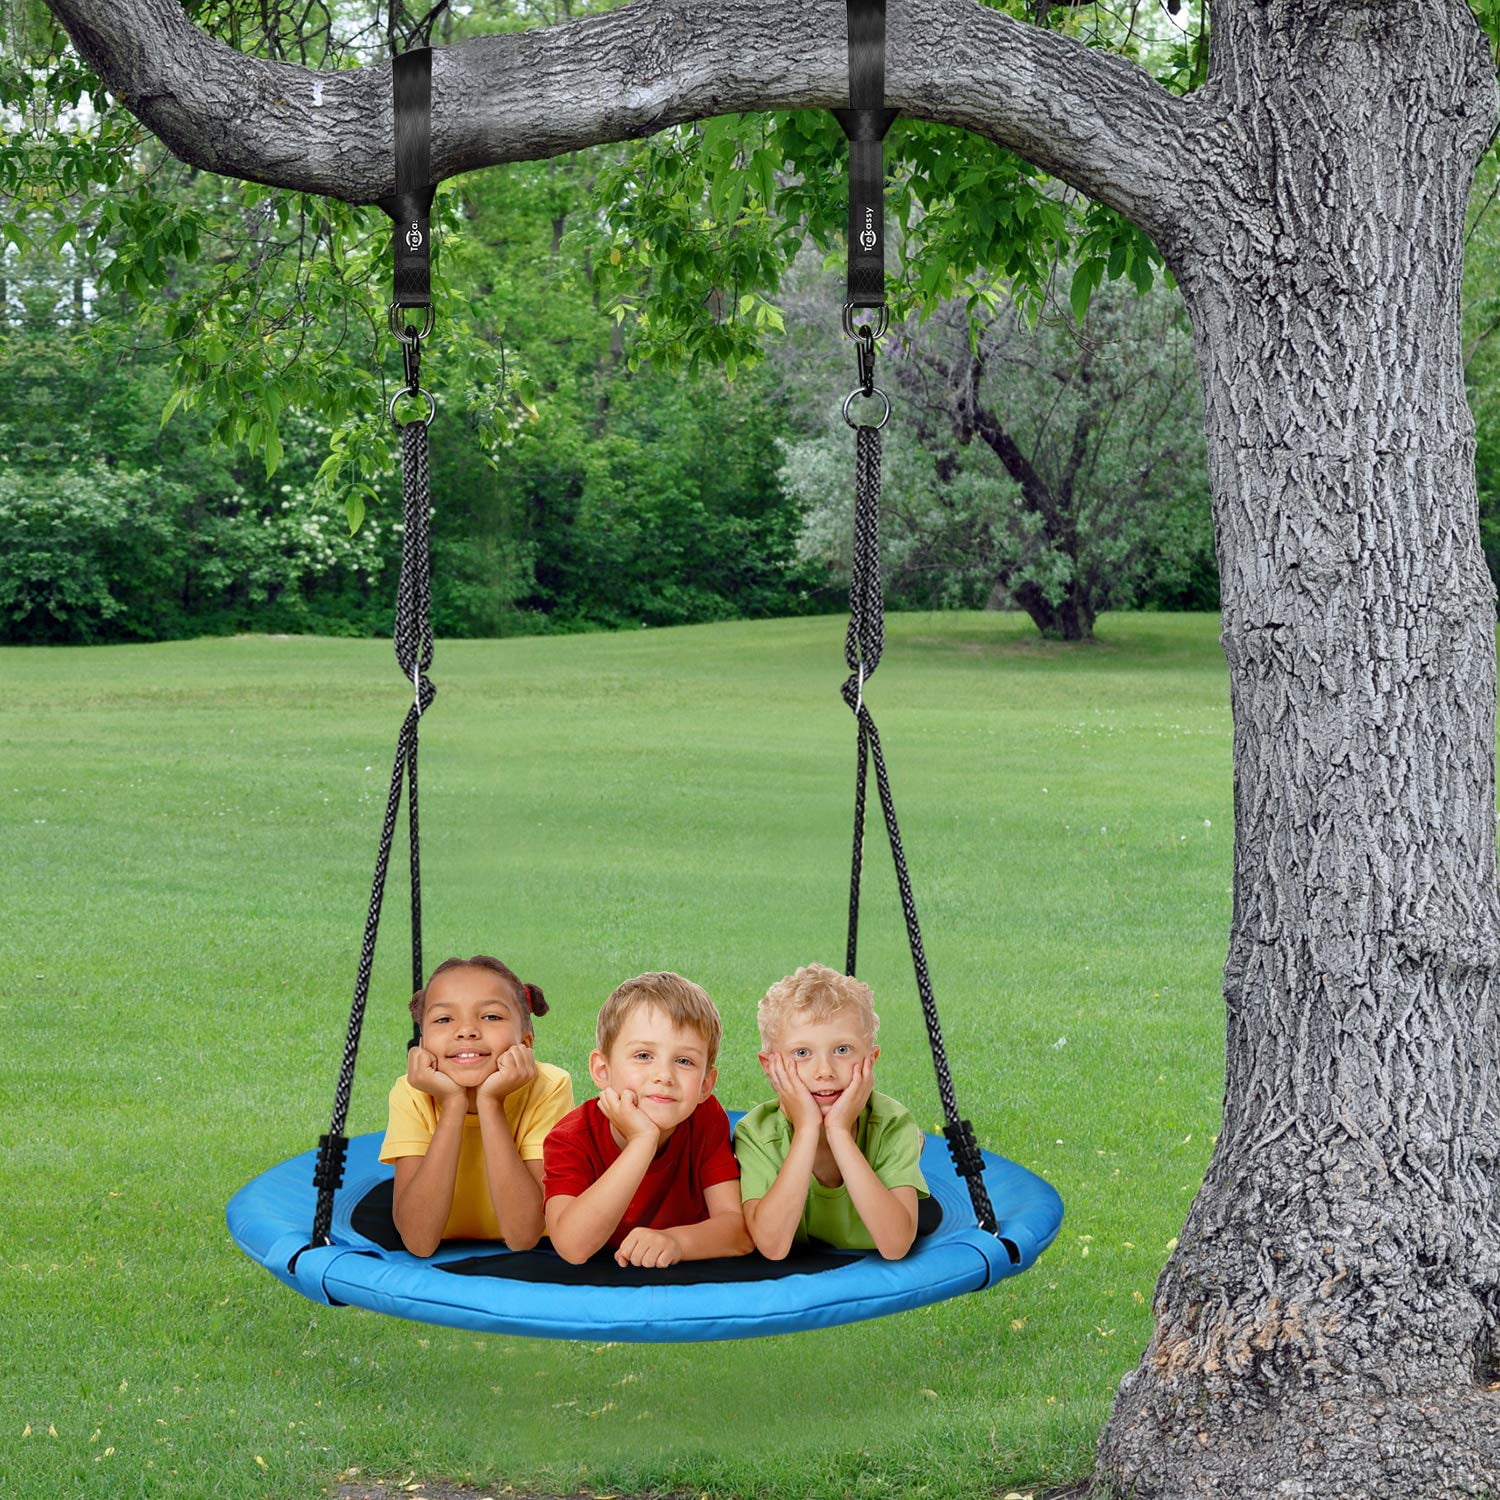 Rainbow Trekassy 700 lb Saucer Tree Swing for Kids Adults 40 Inch 900D Oxford Waterproof Frame with 2 Hanging Straps 